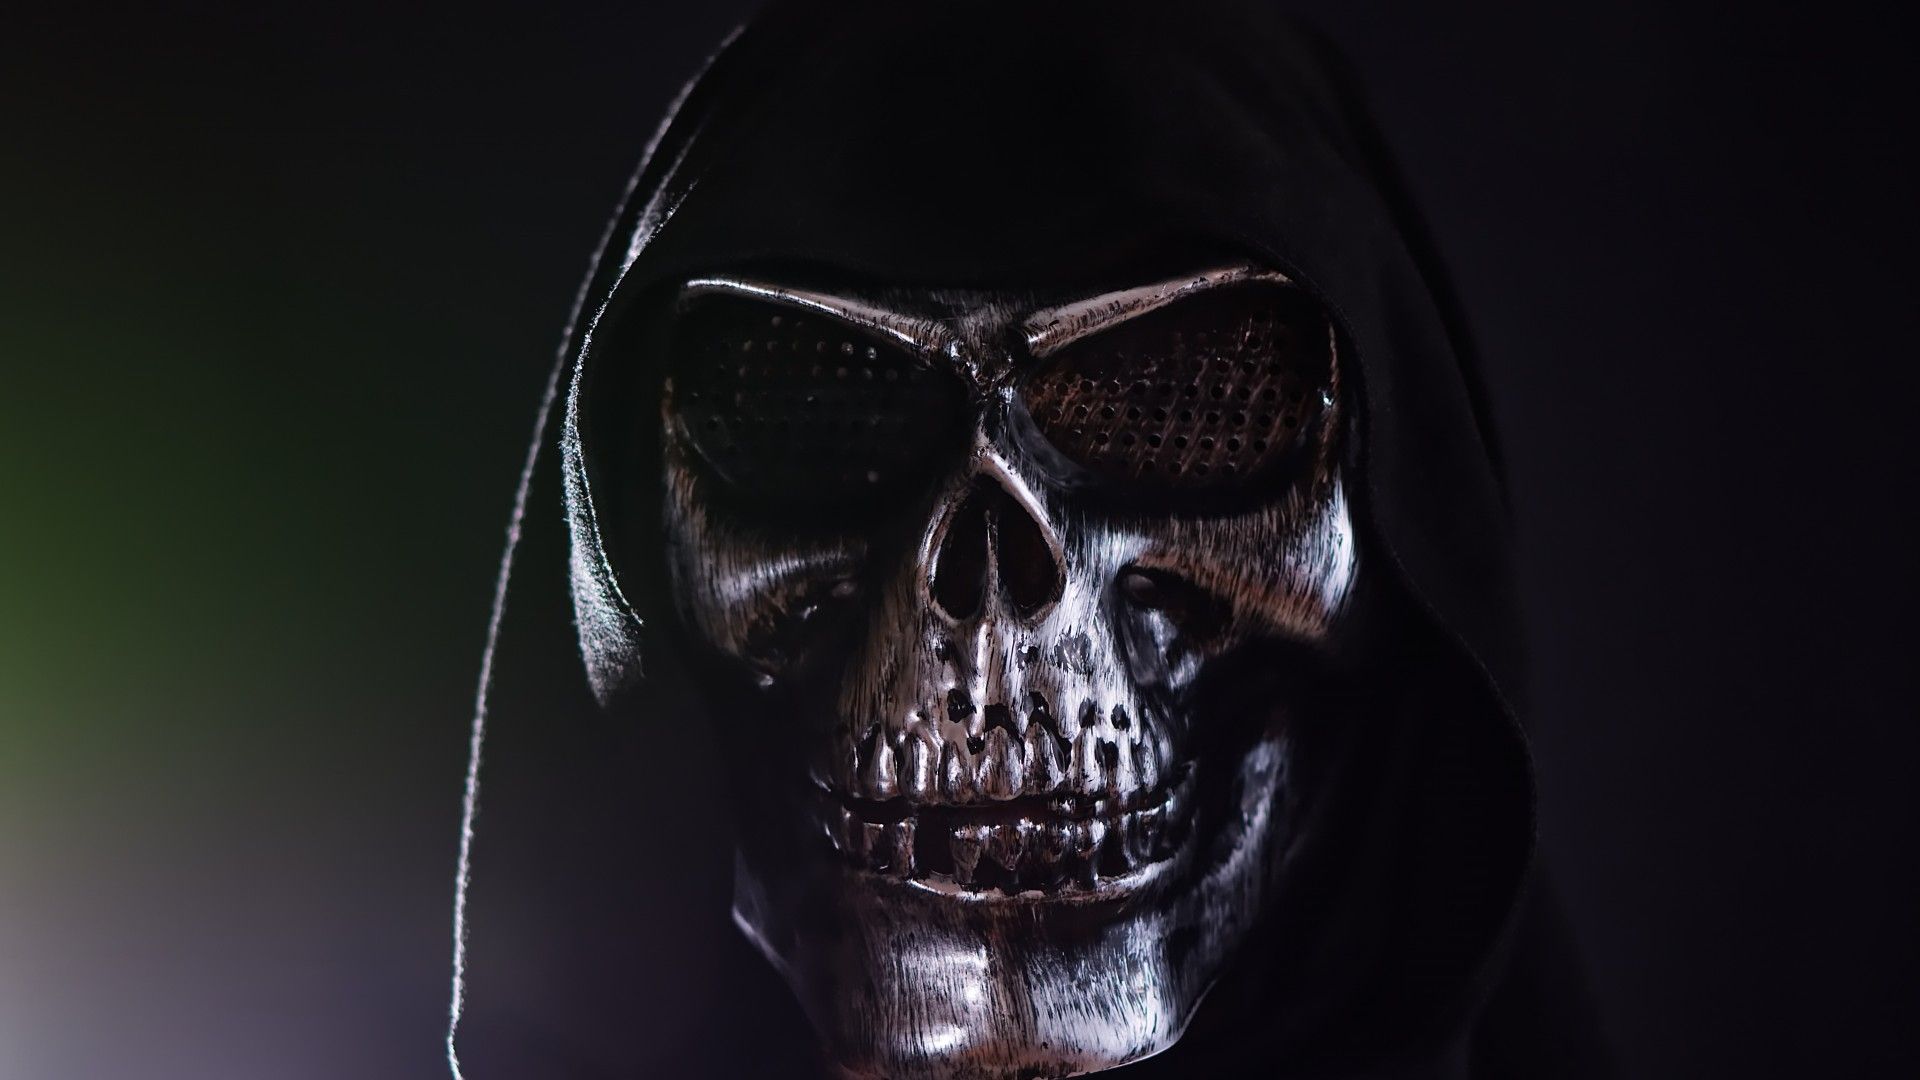 Download 1920x1080 Skull Mask, Black Hoodie, Scary, Horror Wallpaper for Widescreen